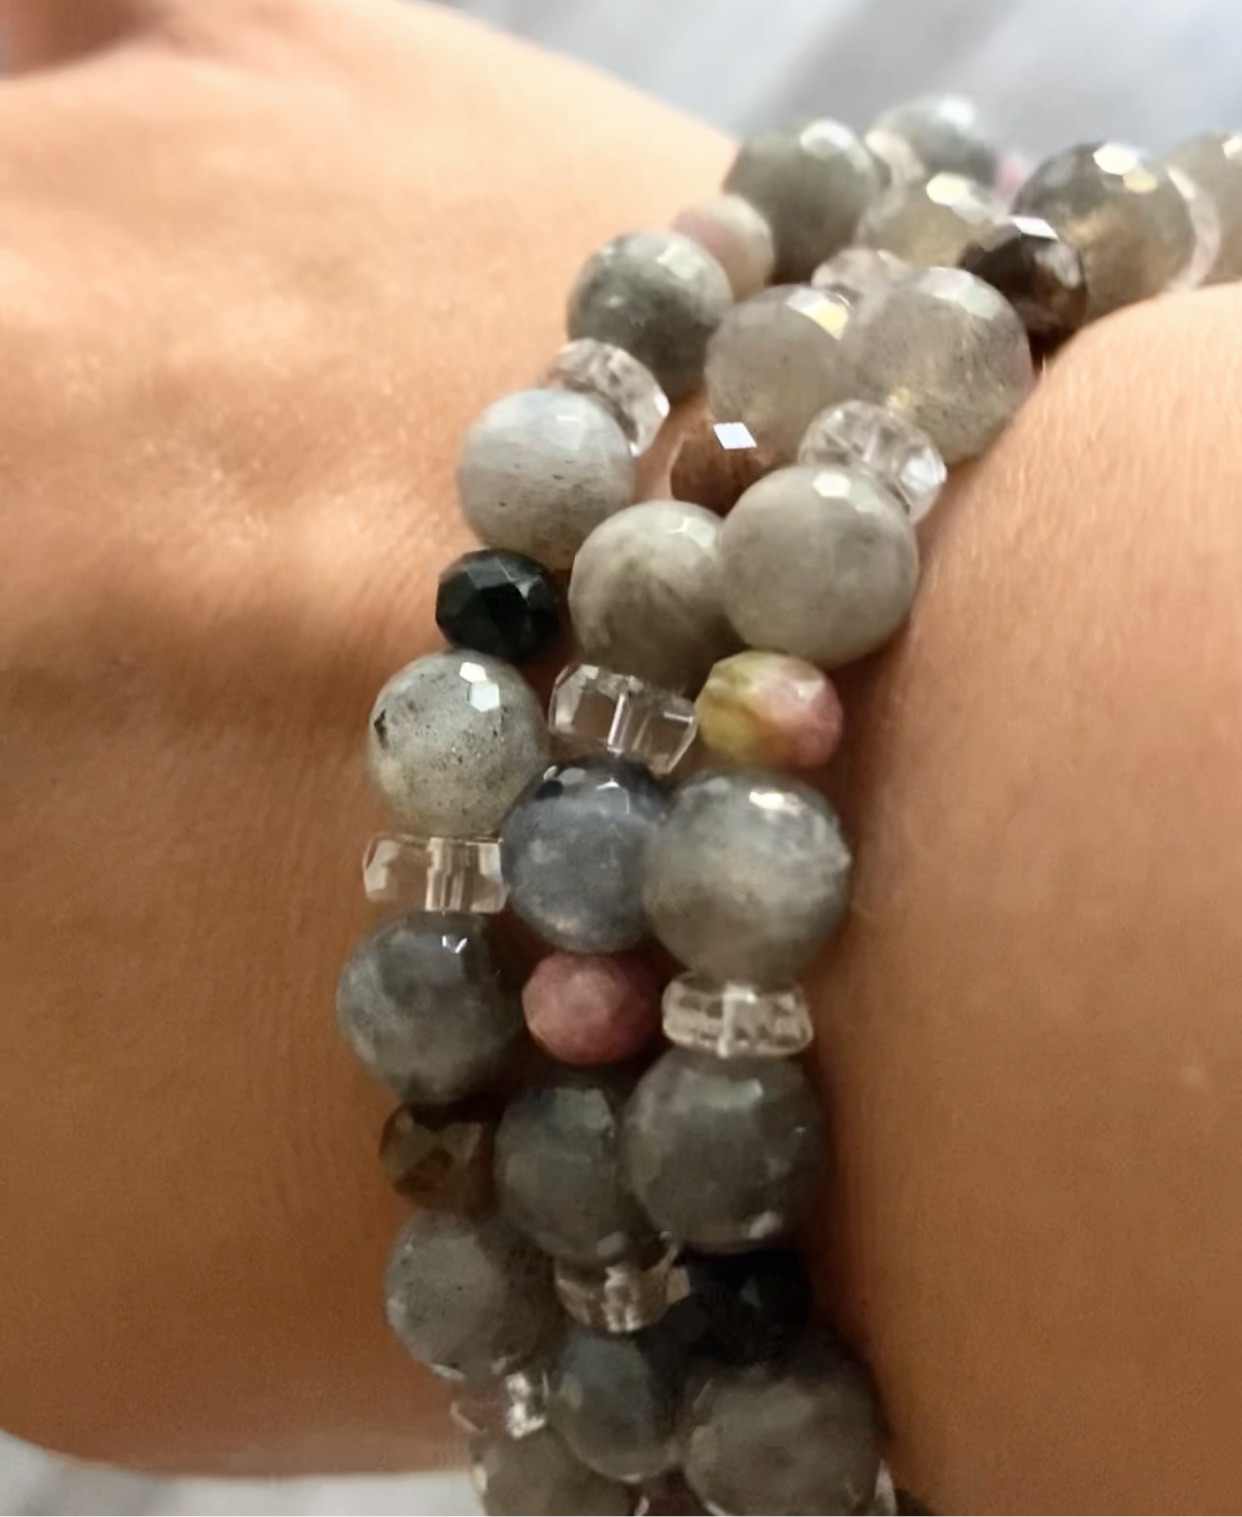 Labradorite, tourmaline, quartz Crystal, necklace. This can be worn as a bracelet. Treat yourself to some major bling bling! Show off your wardrobe's style and savvy